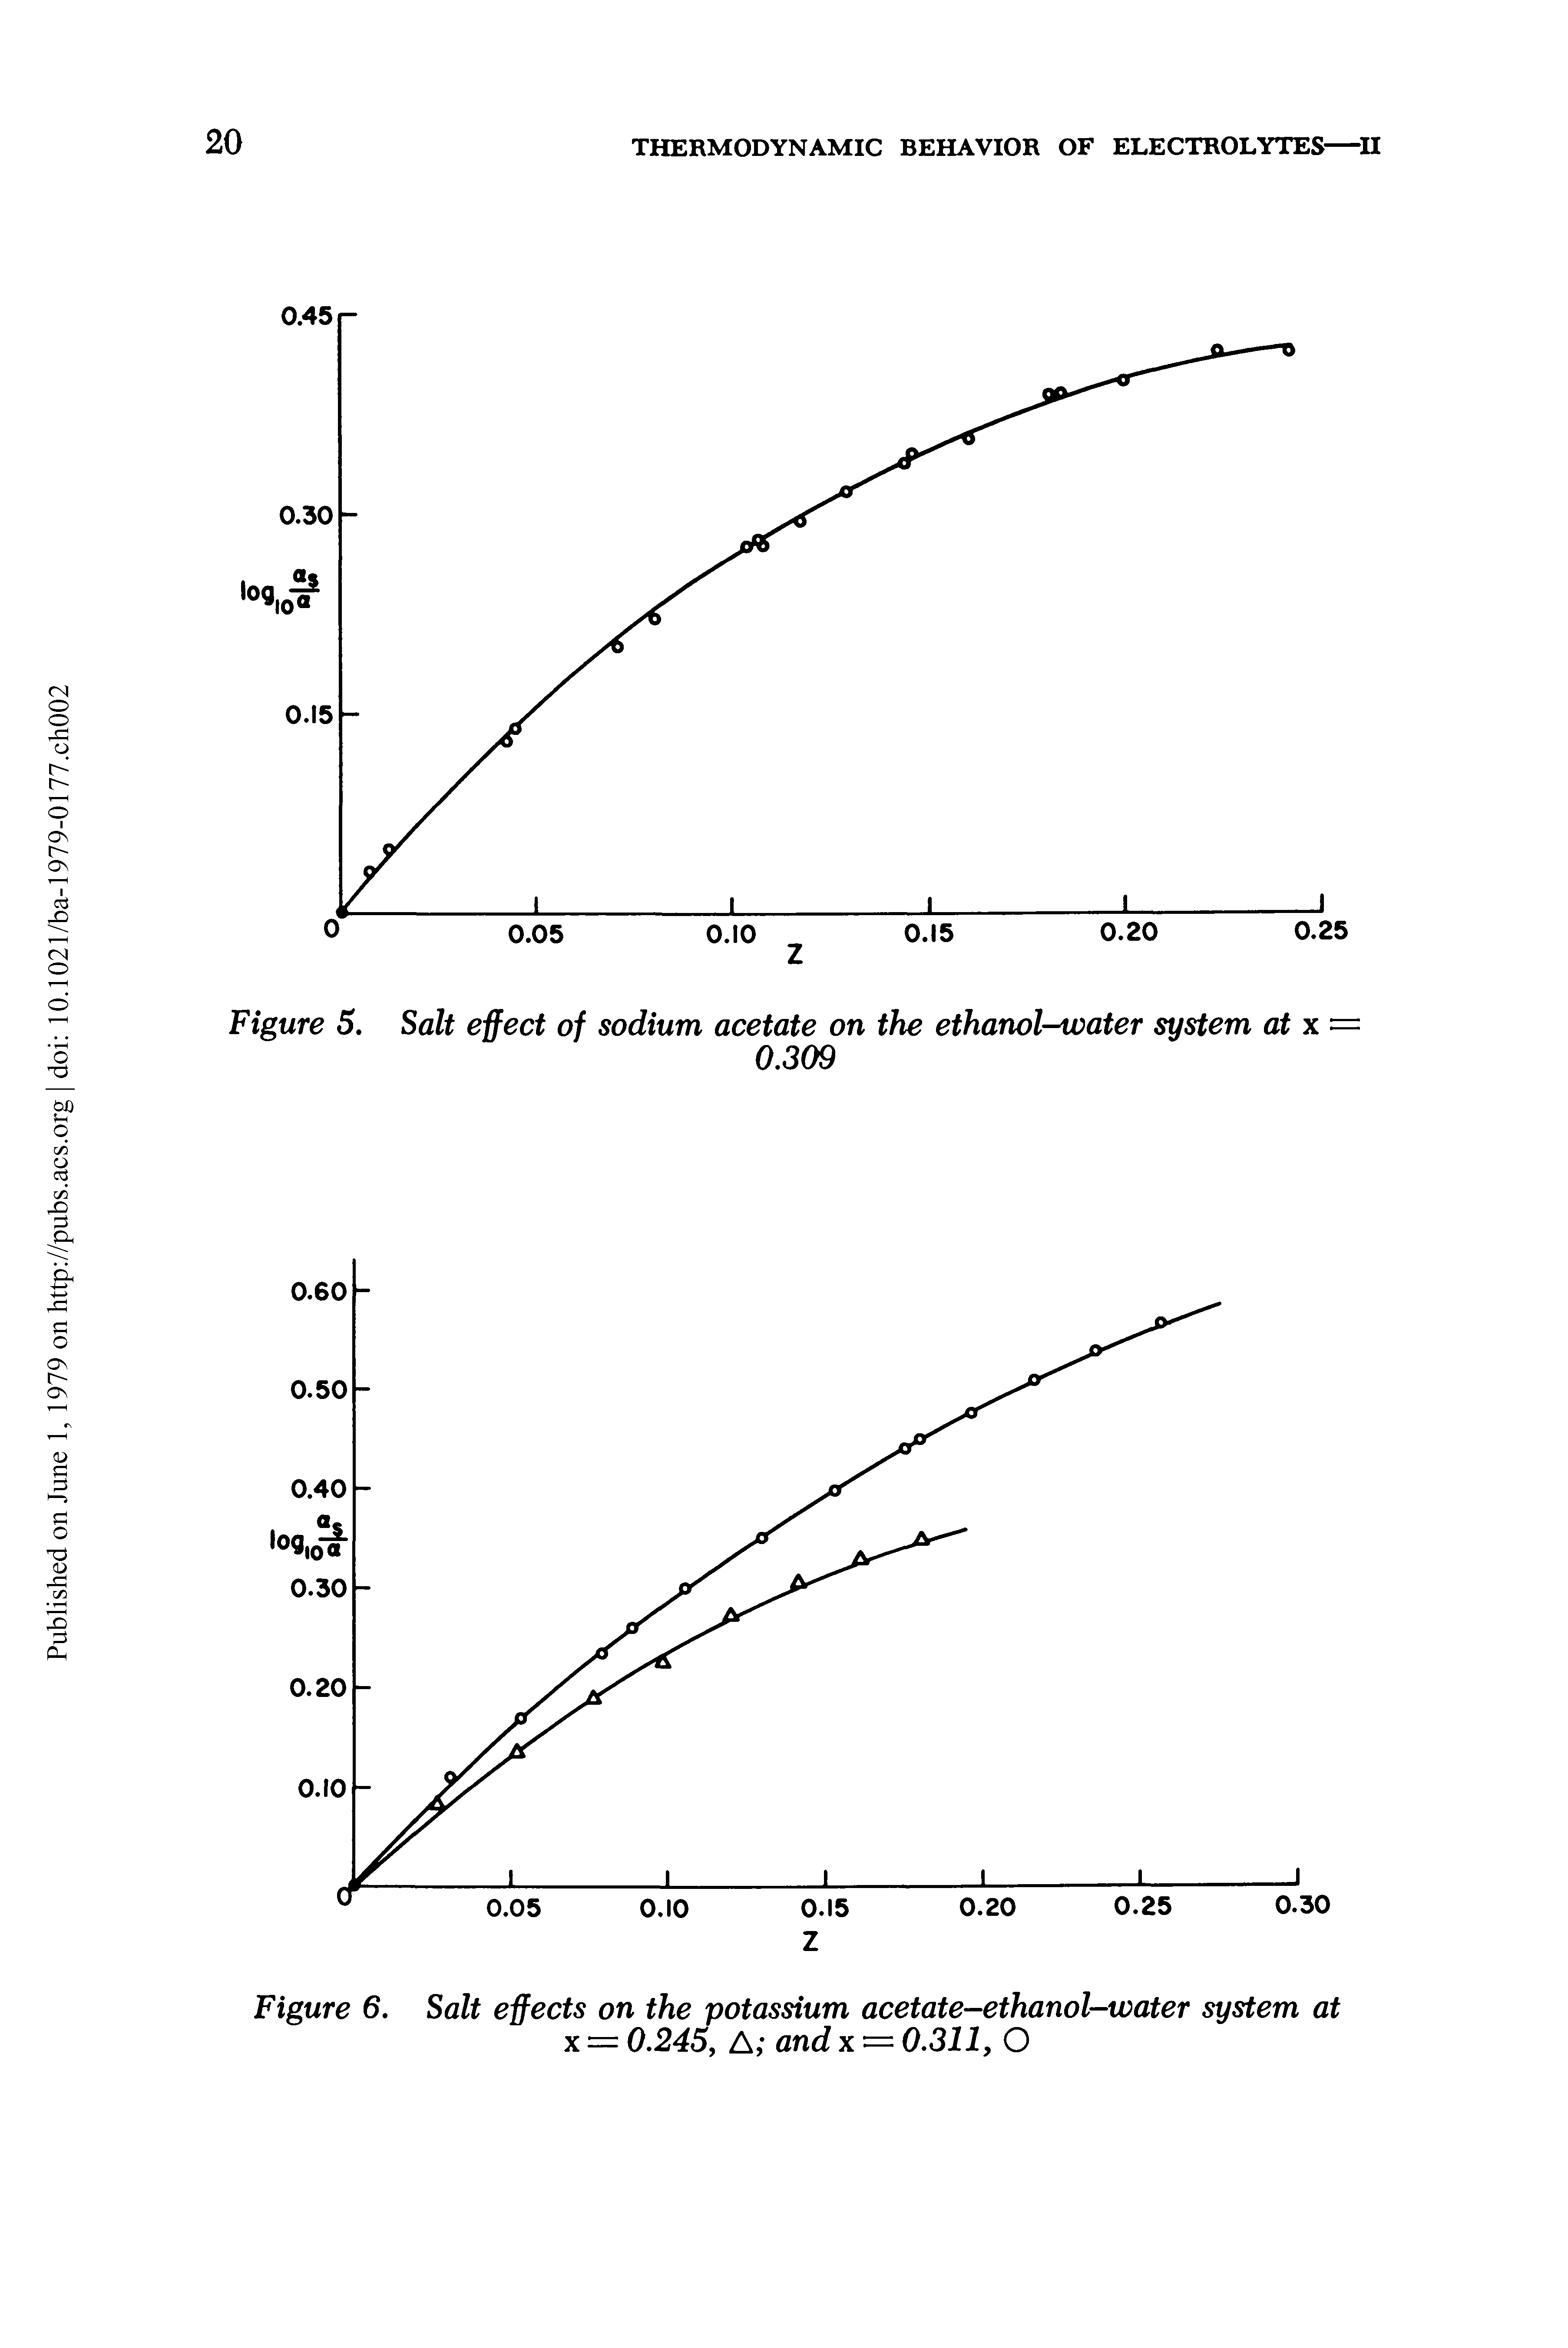 Figure 6. Salt effects on the potassium acetate-ethanol-water system at x = 0.245, A and x = 0.311, O...